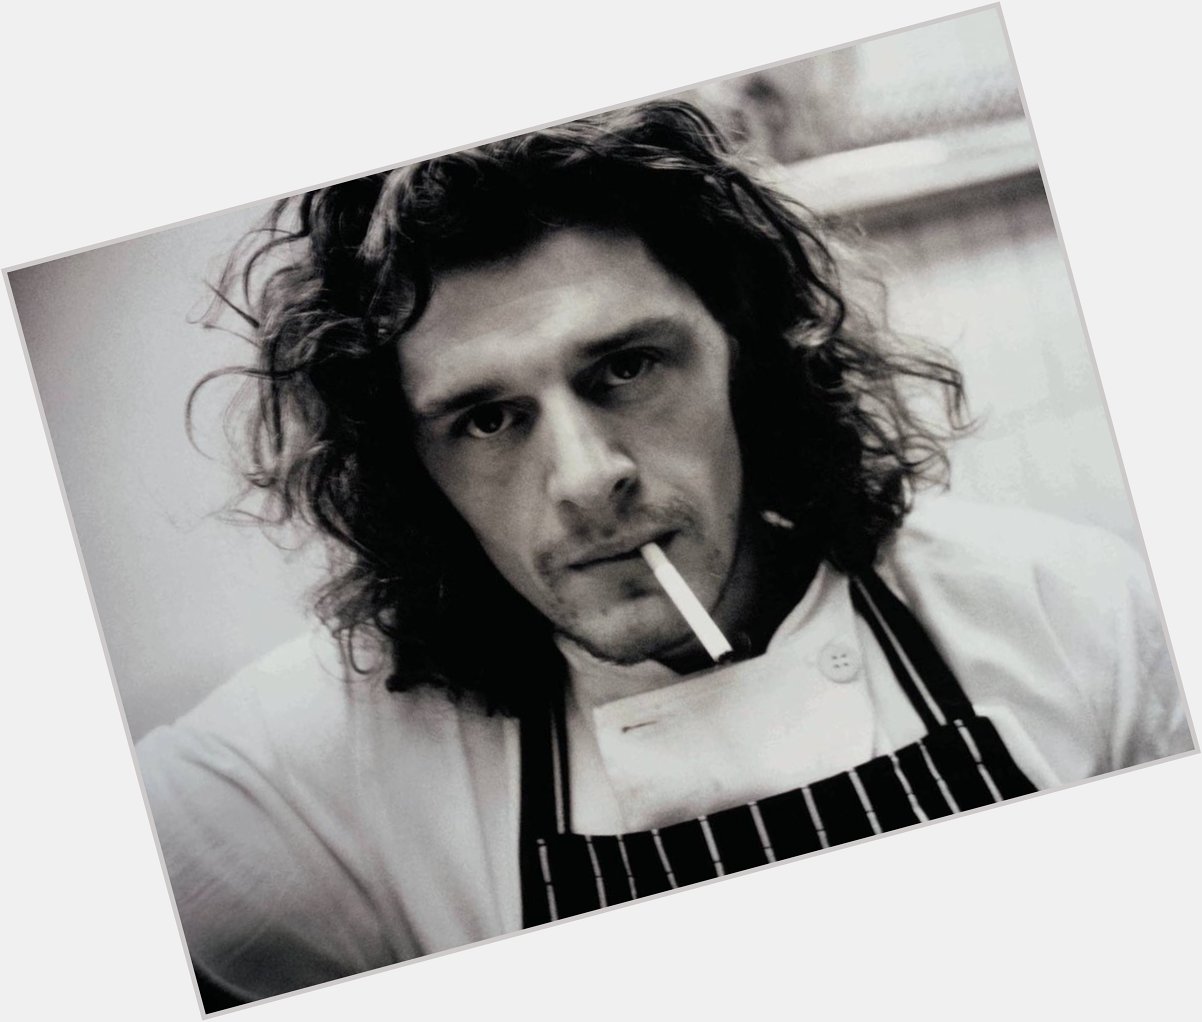 Happy birthday Marco Pierre White! Love from The Little Black Gallery. Picture by Bob Carlos Clarke 